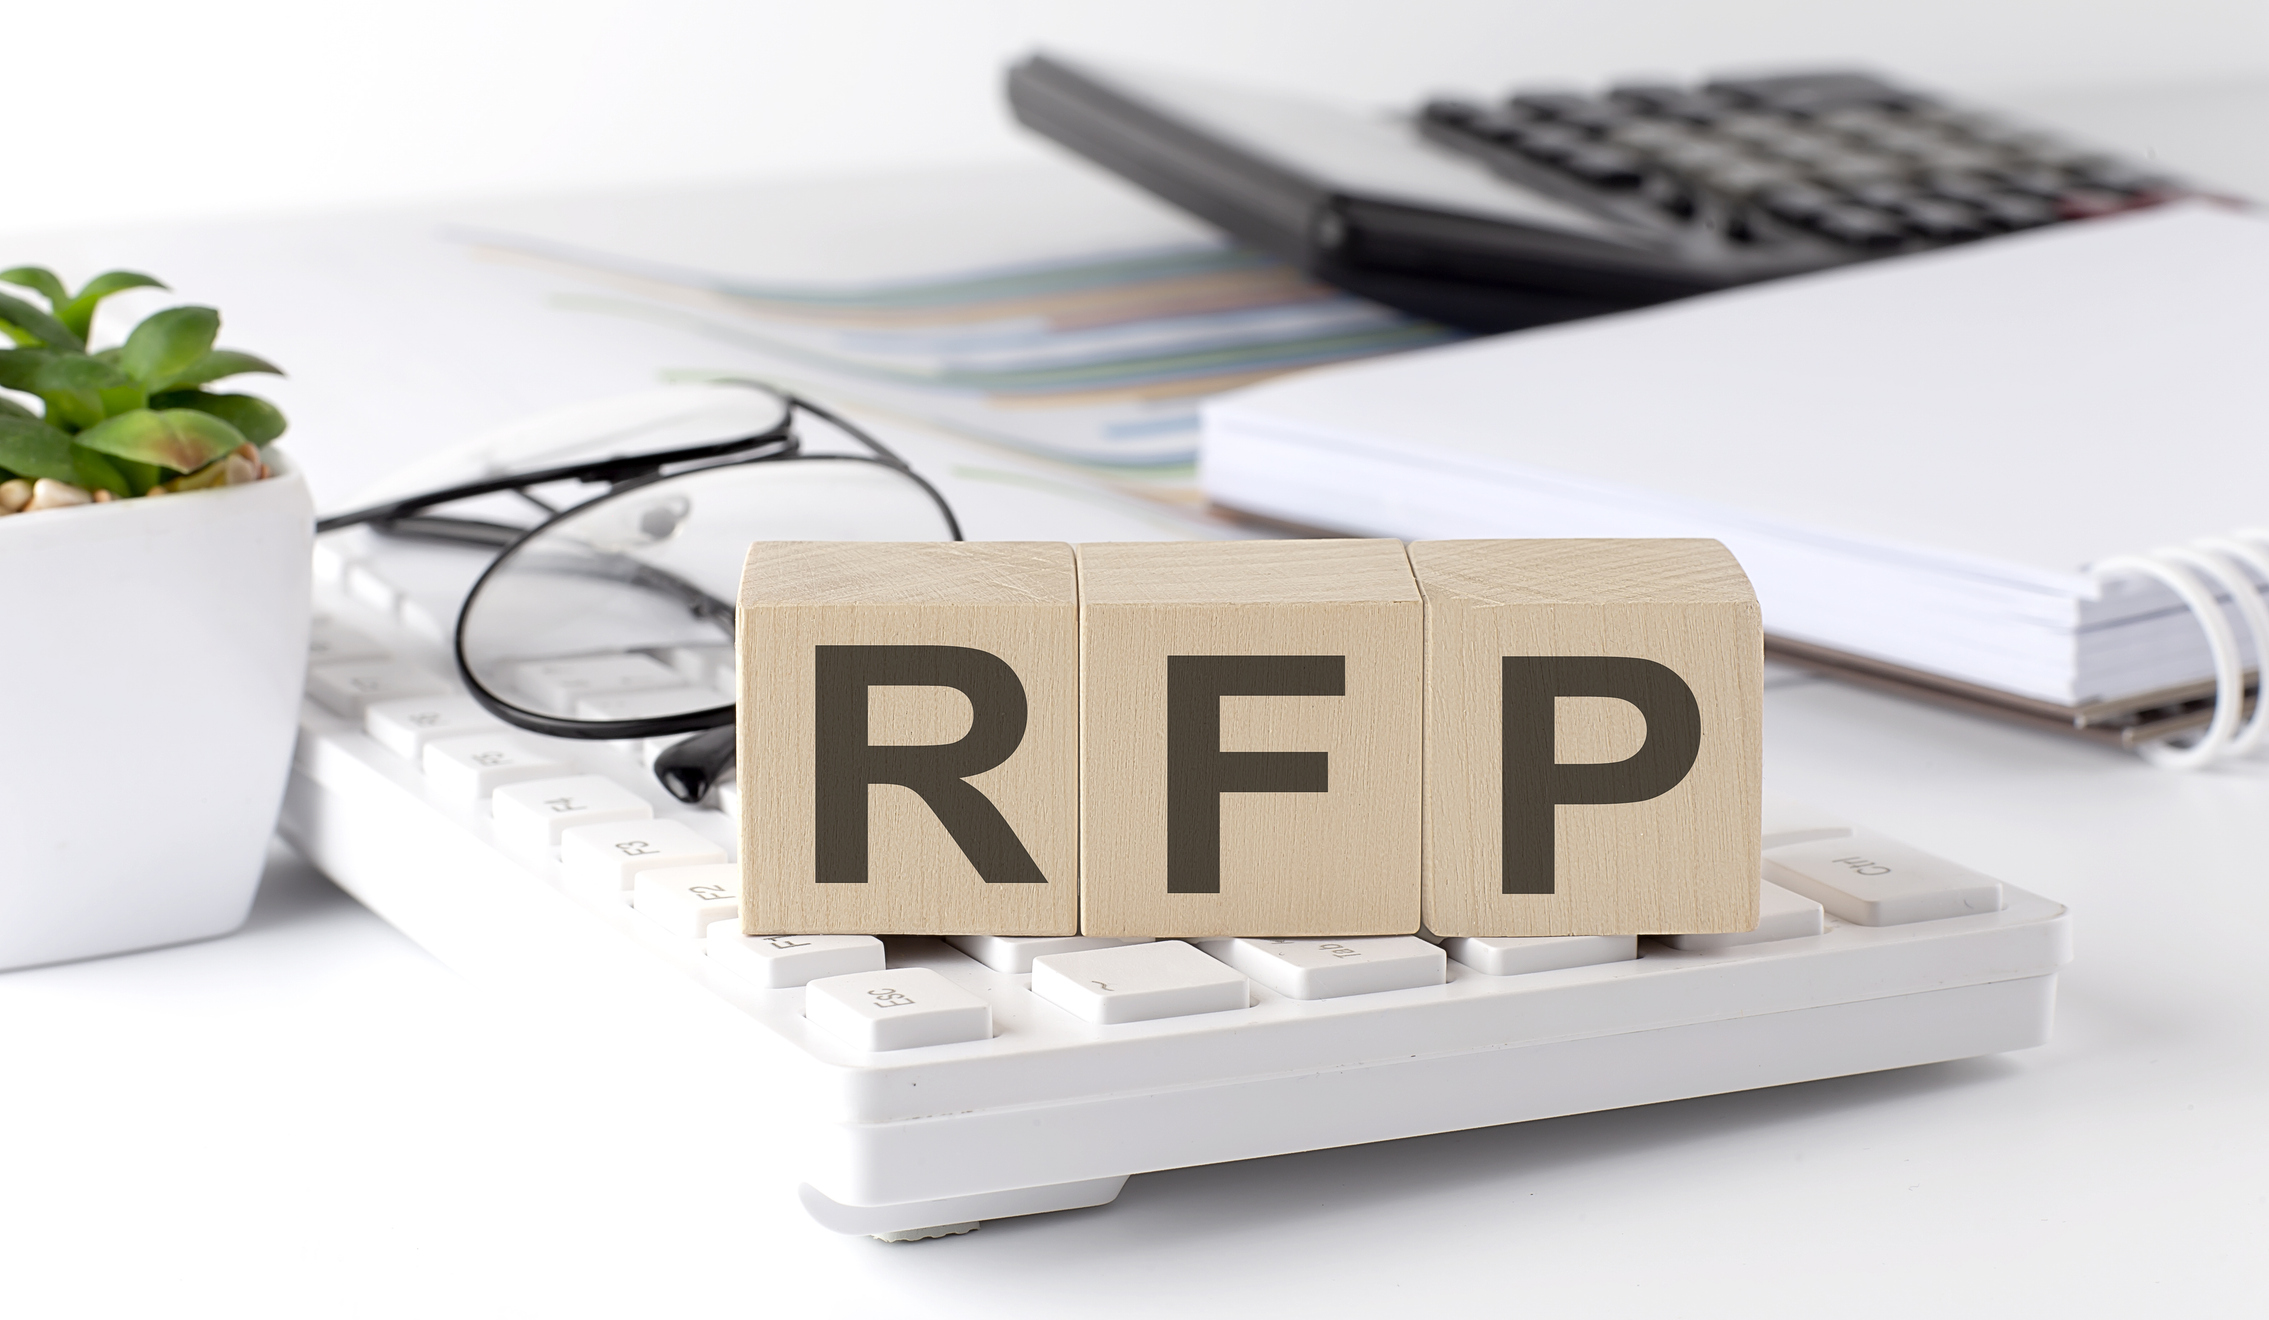 RFP written on a wooden cube on keyboard with office tools